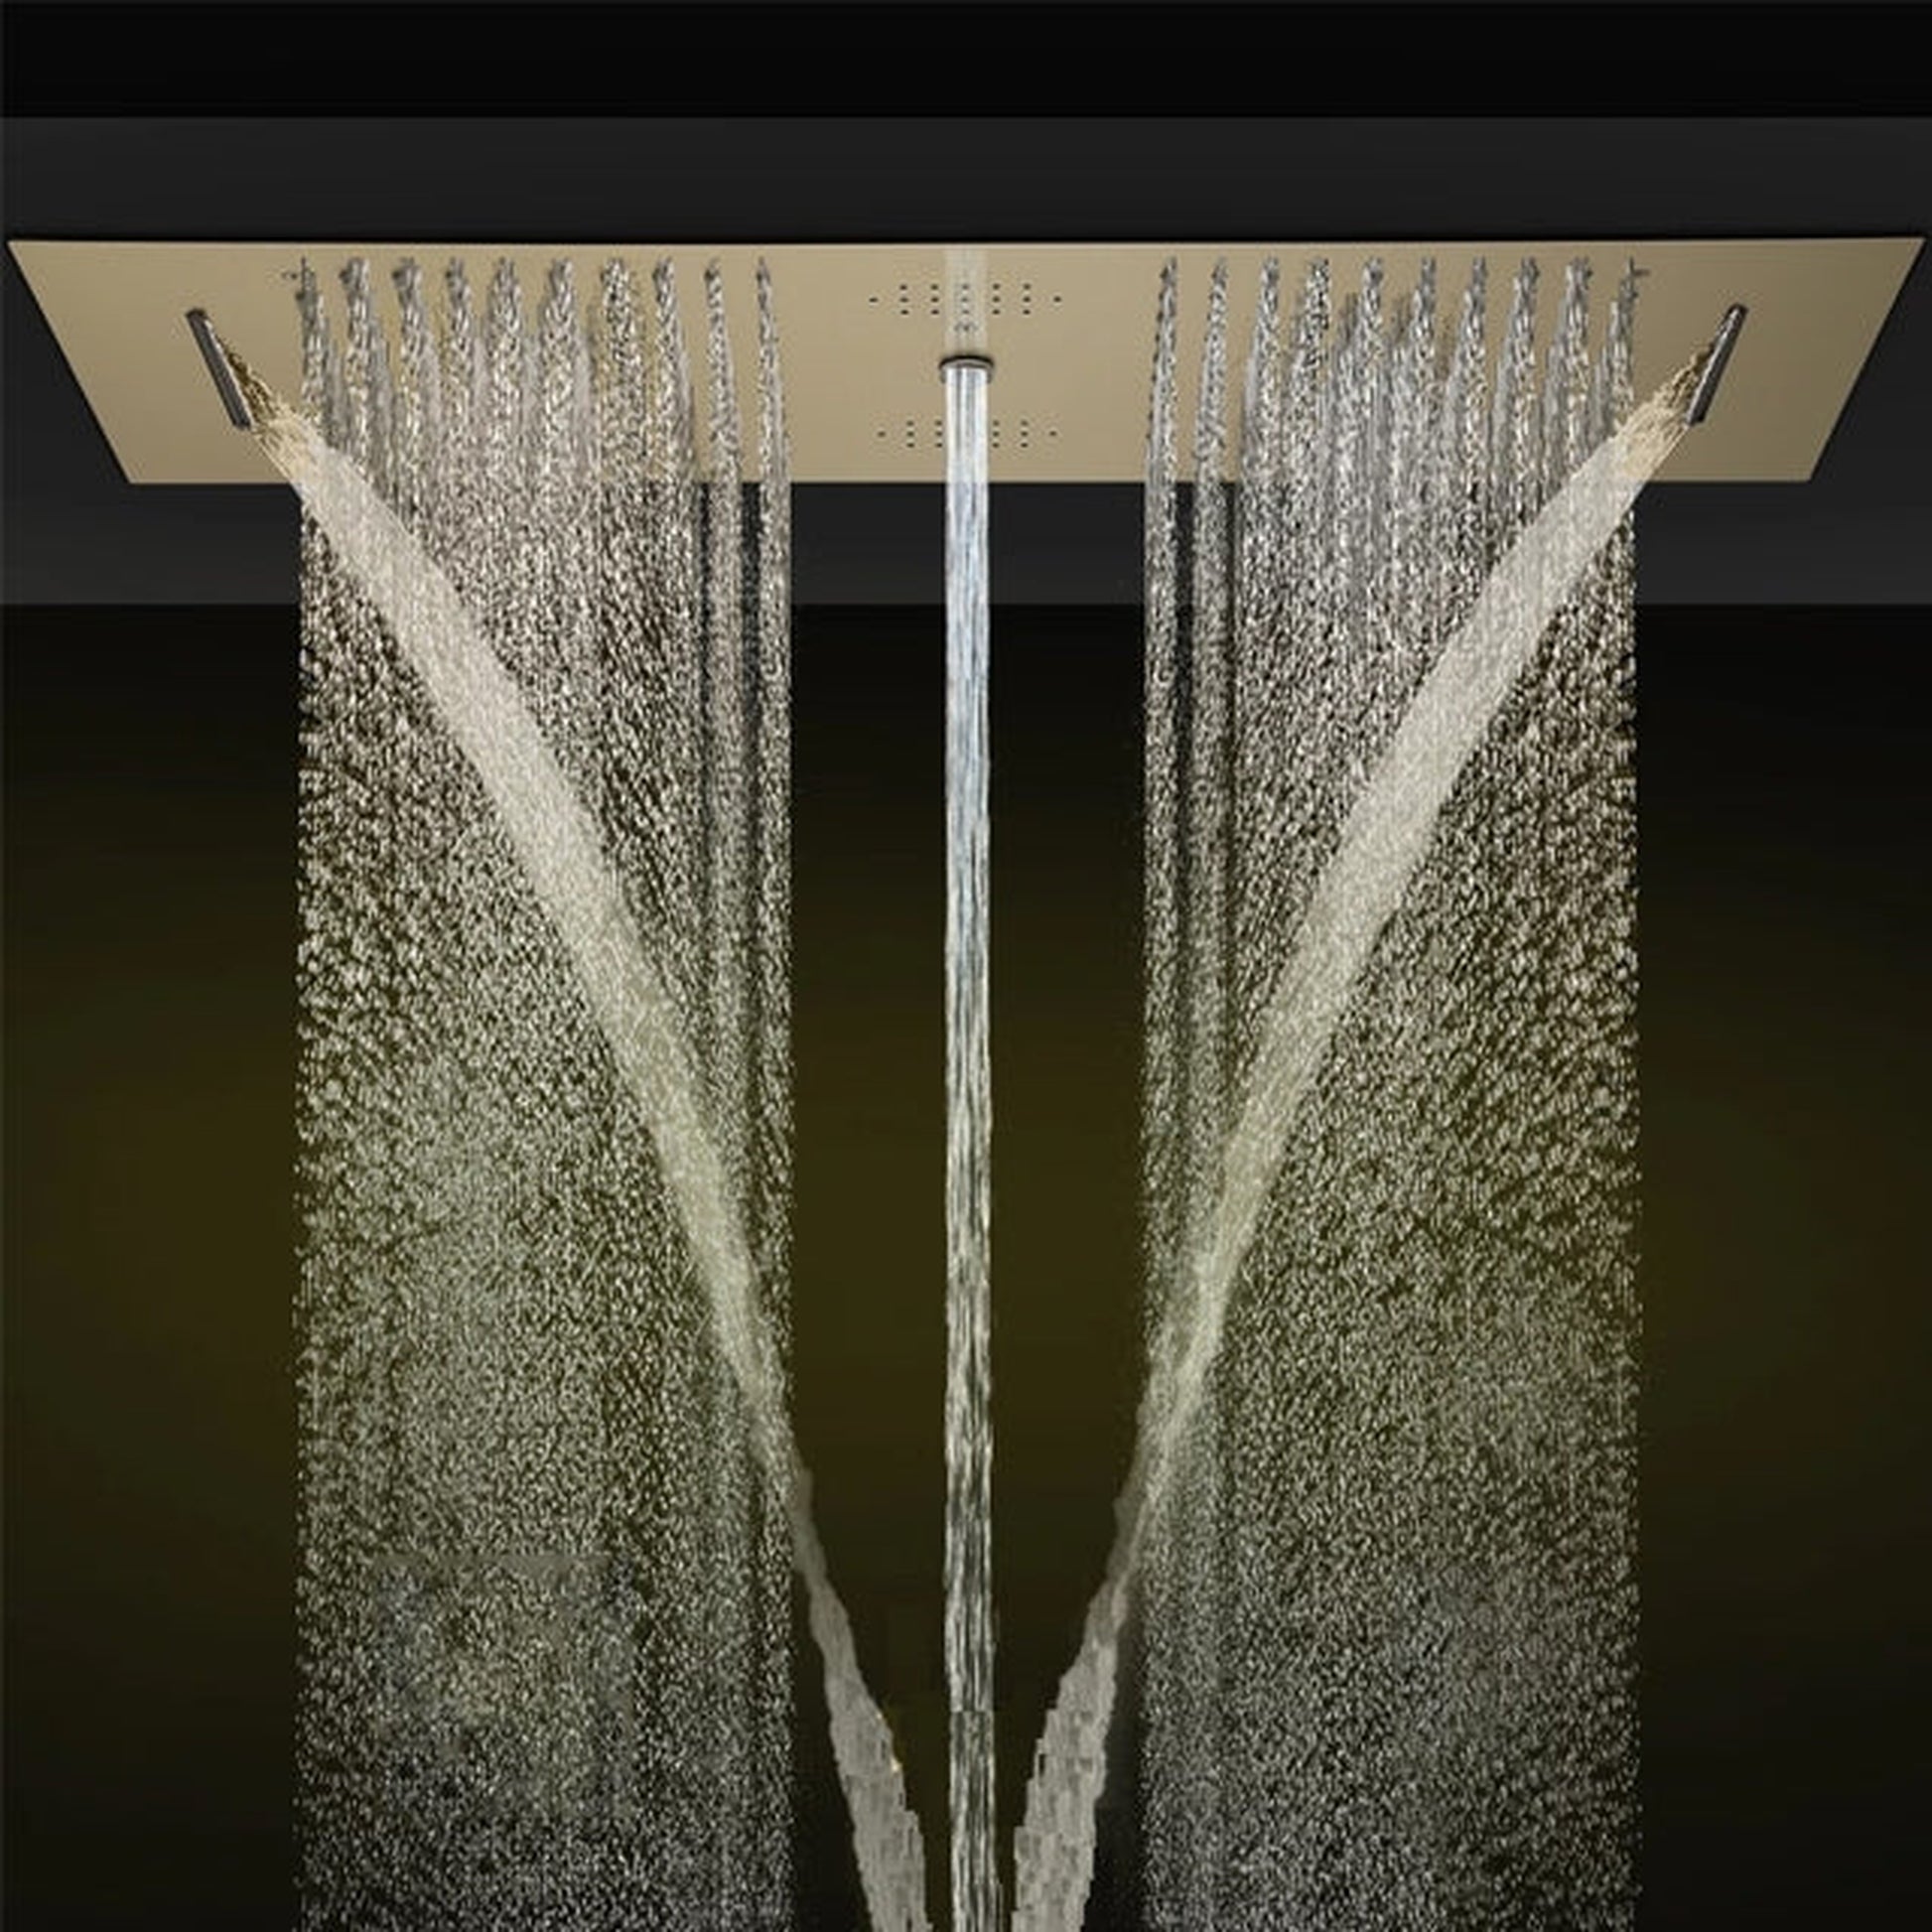 Fontana Florence Brushed Gold Ceiling Mounted Touch Panel Controlled Thermostatic Recessed Smart Musical LED Rainfall Waterfall Shower System With Hand Shower